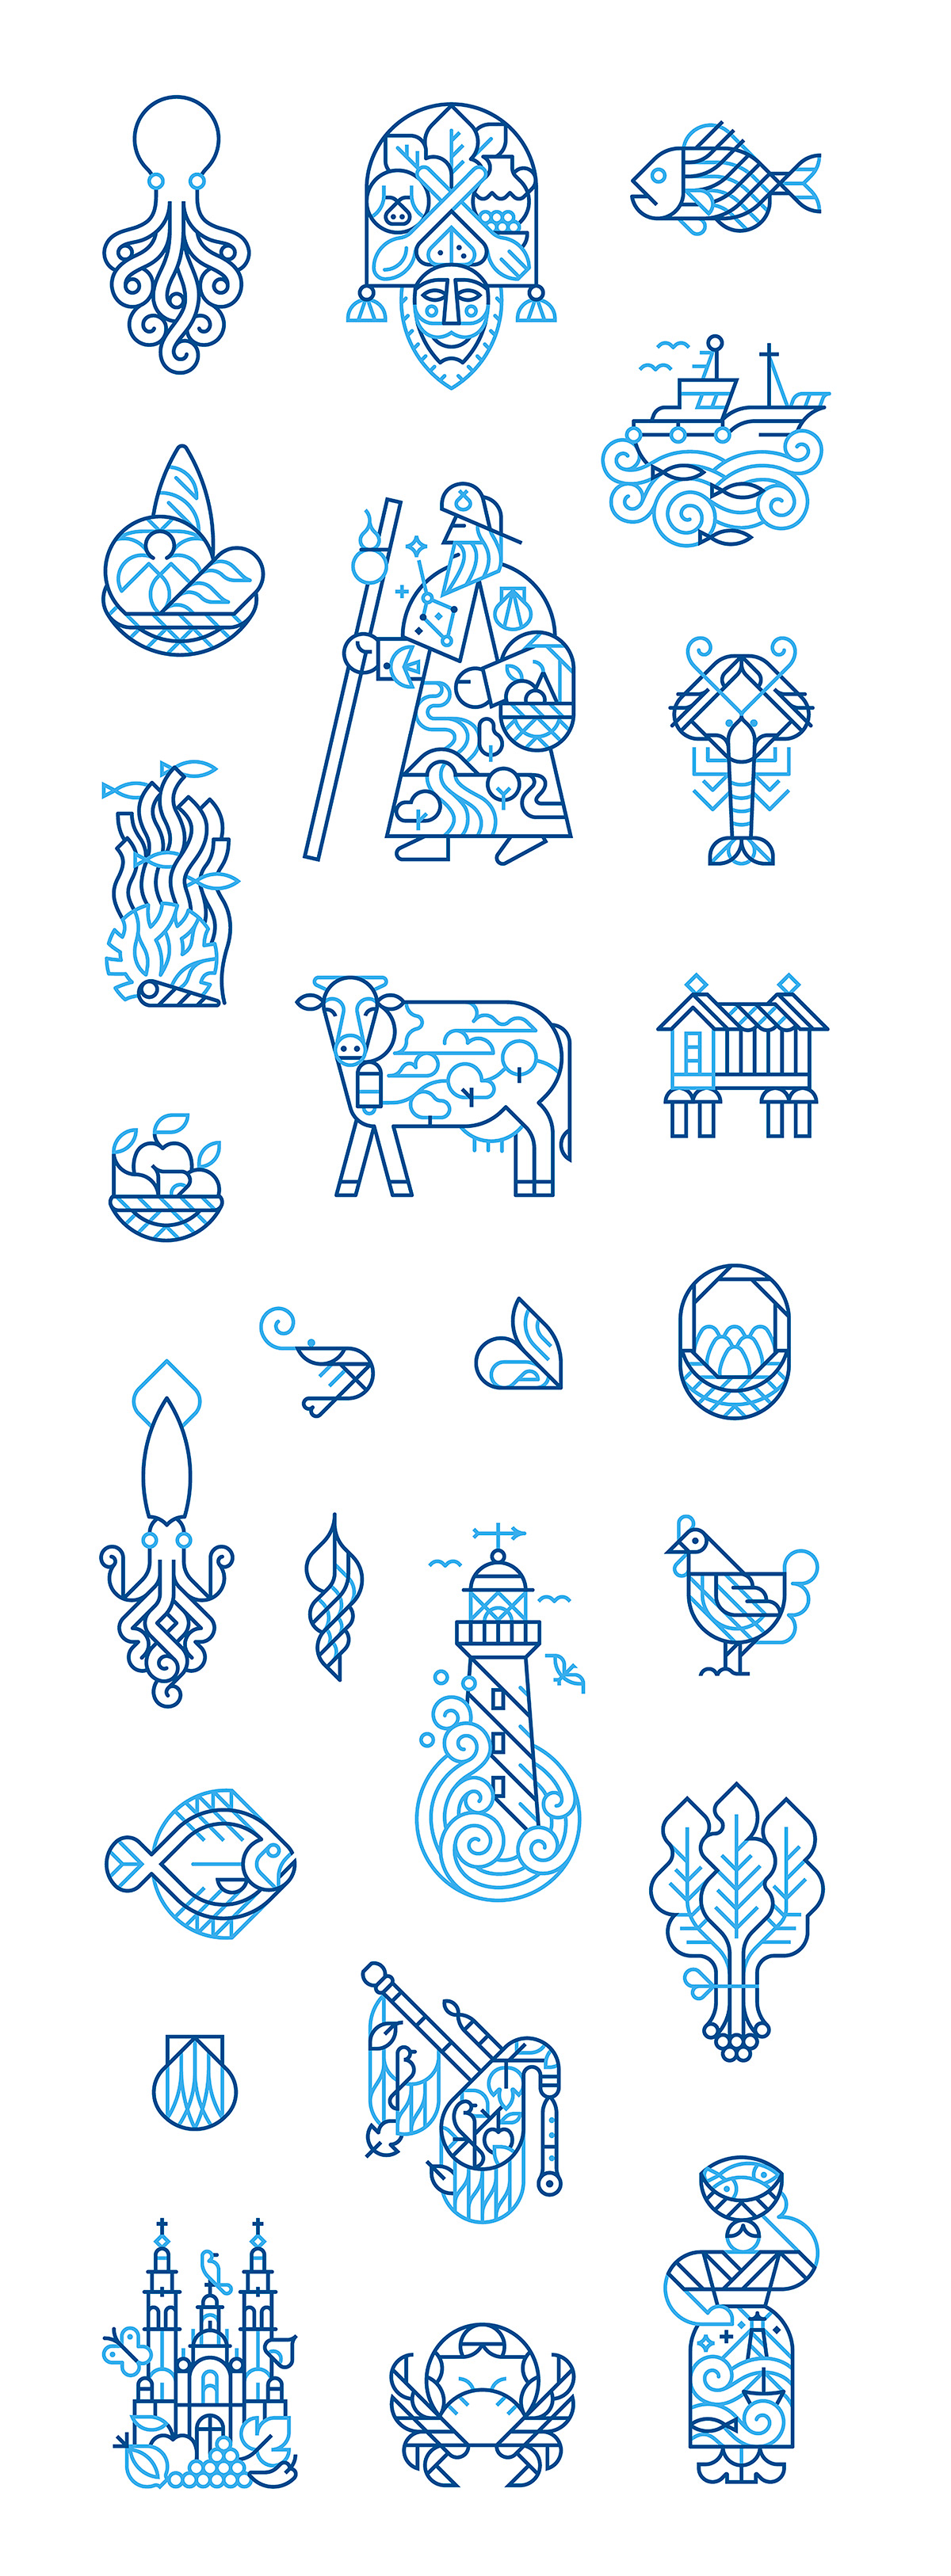 Collection of vectorial icons about Galicia. Linear and geometric style illustrations.